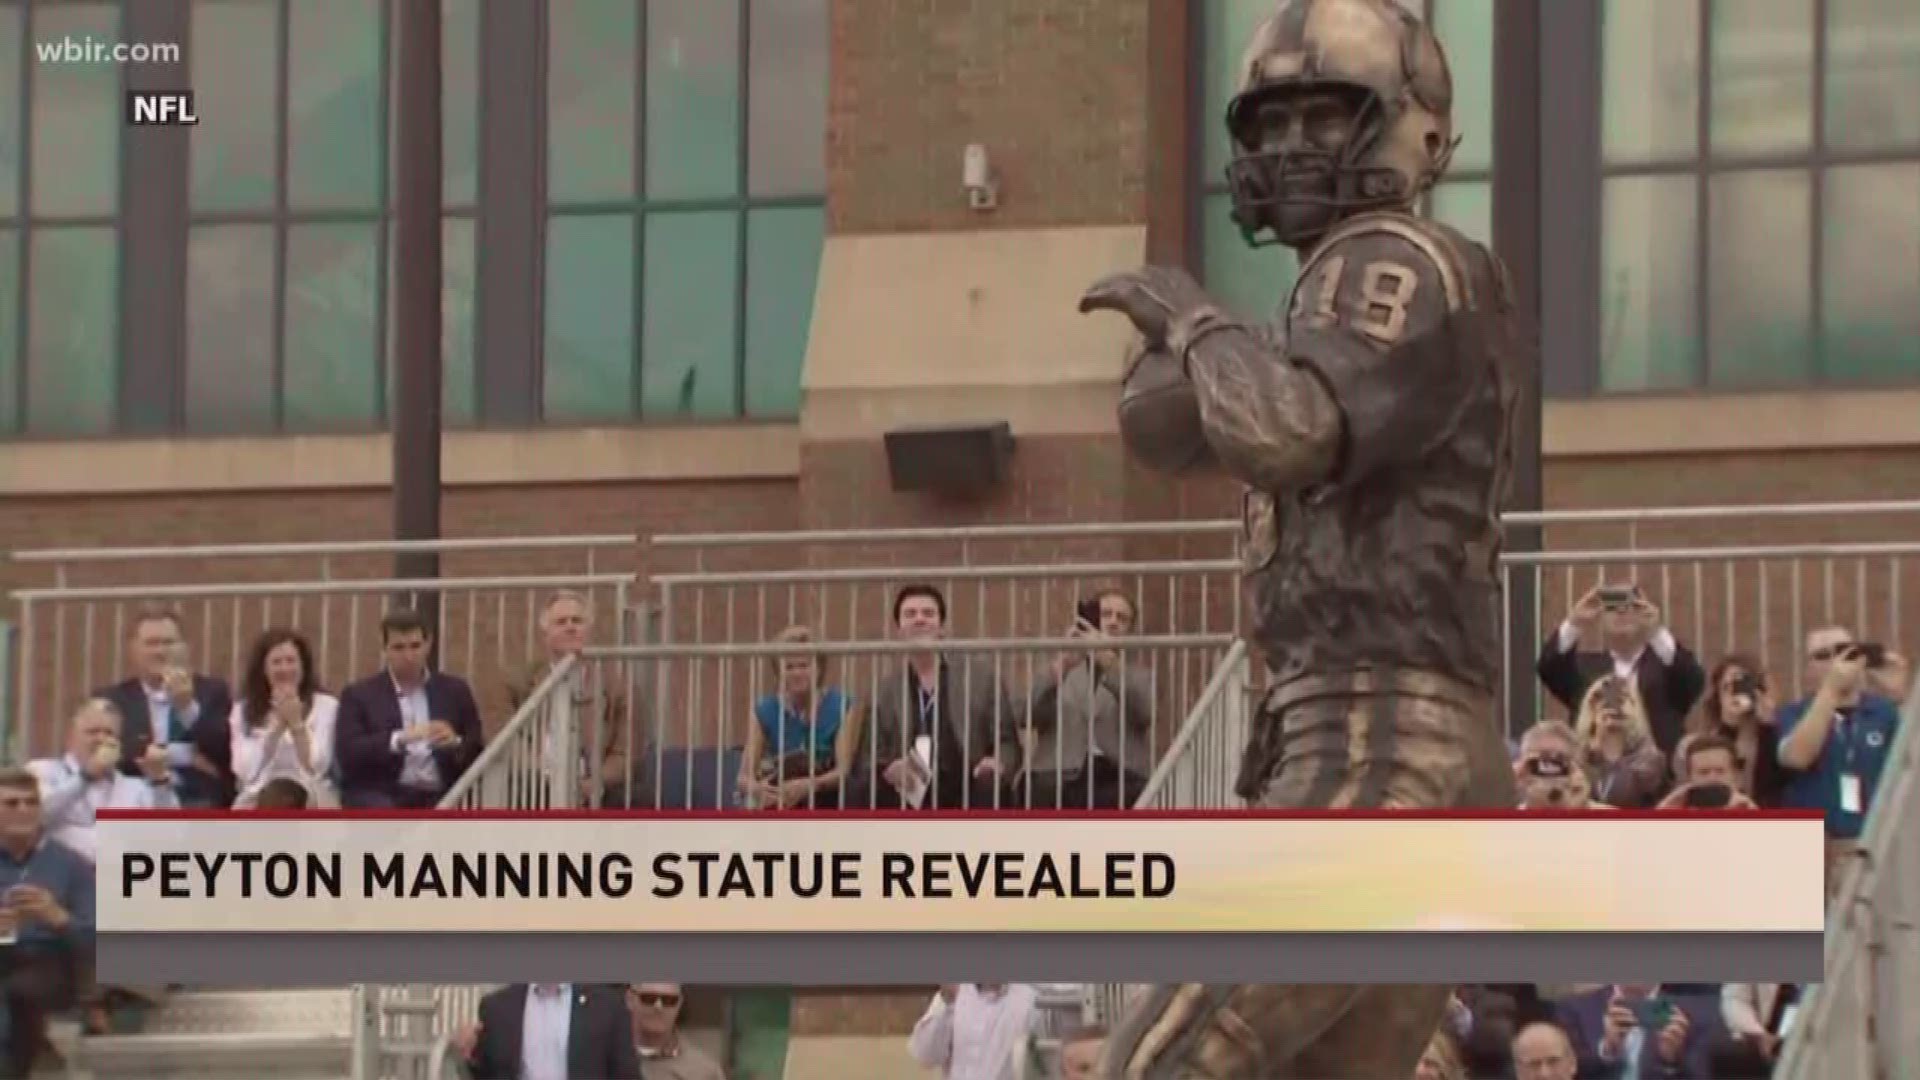 Peyton Manning is set to be honored this weekend in Indianapolis.